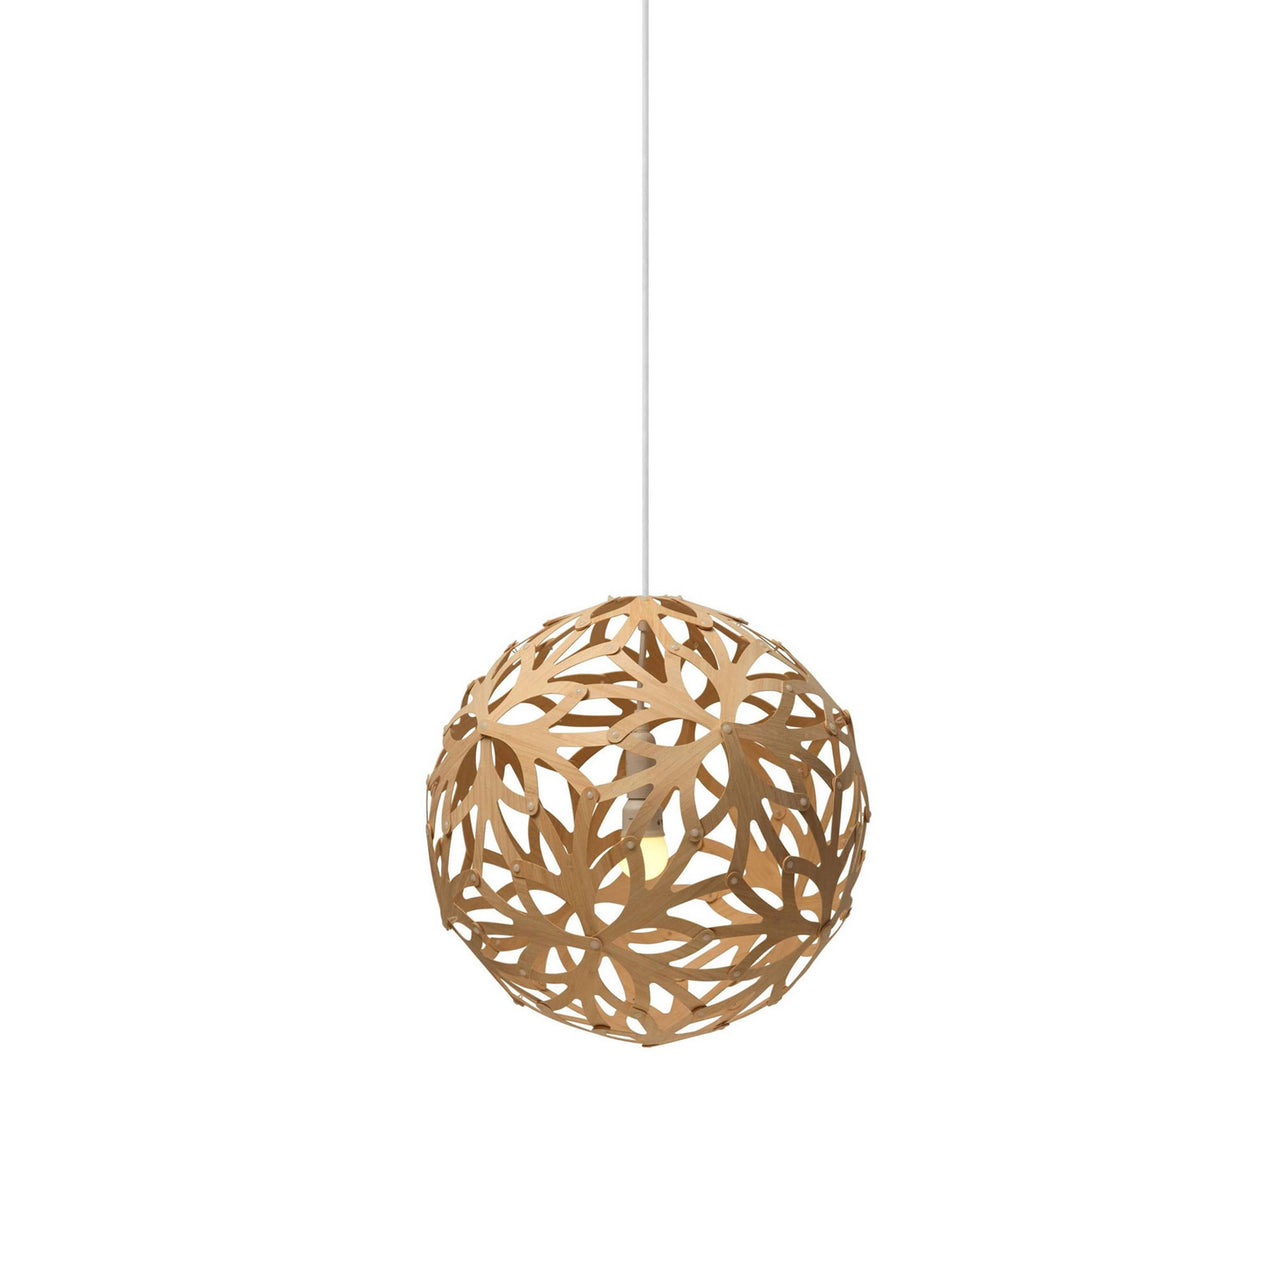 Floral Pendant Light: Extra Small + Bamboo + White